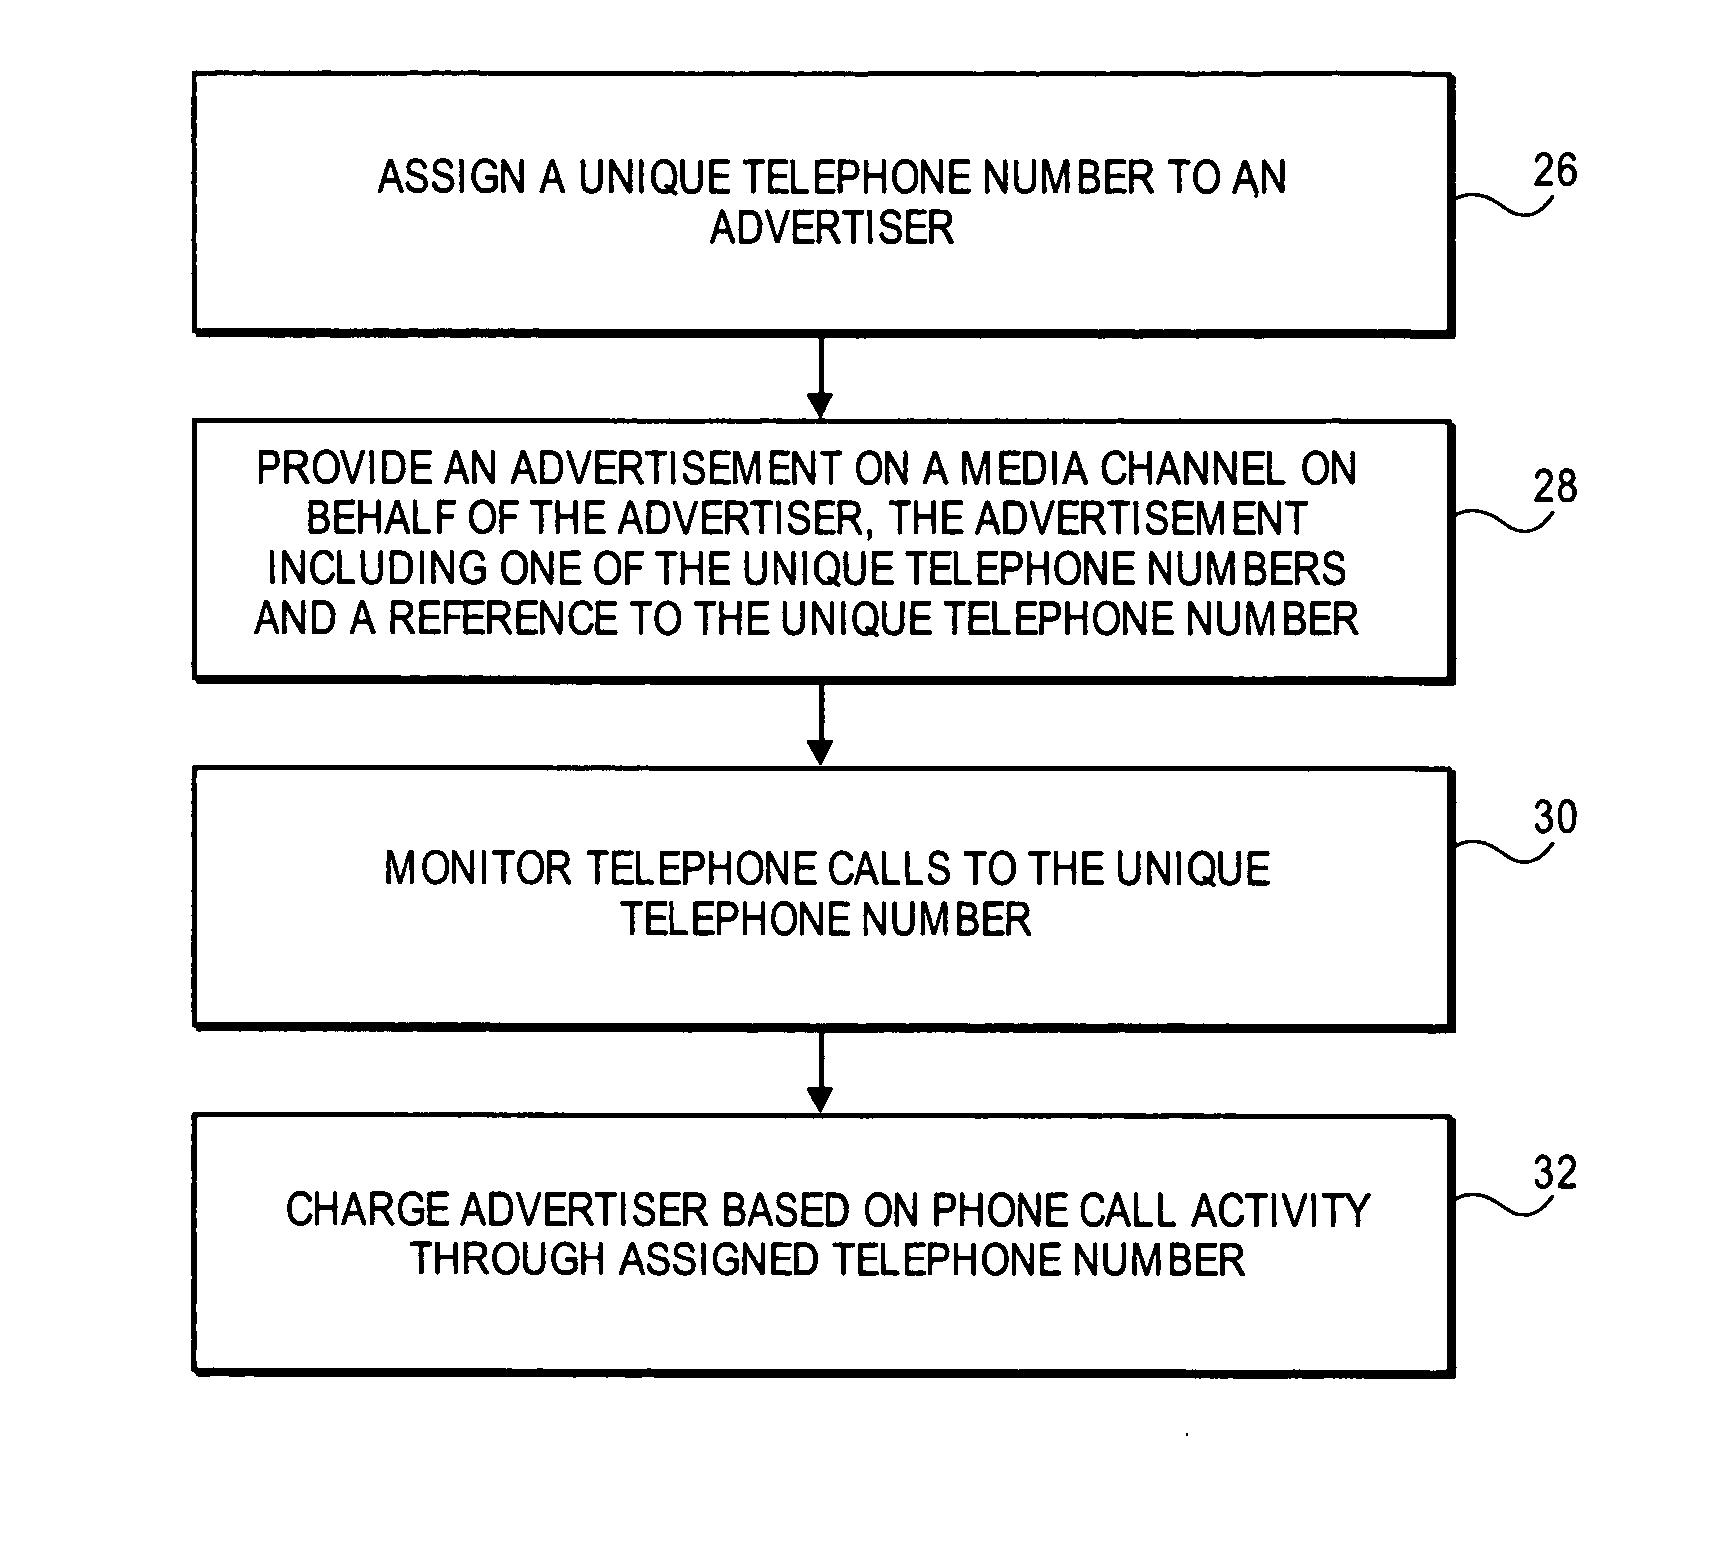 Method and apparatus to compensate demand partners in a pay-per-call performance based advertising system